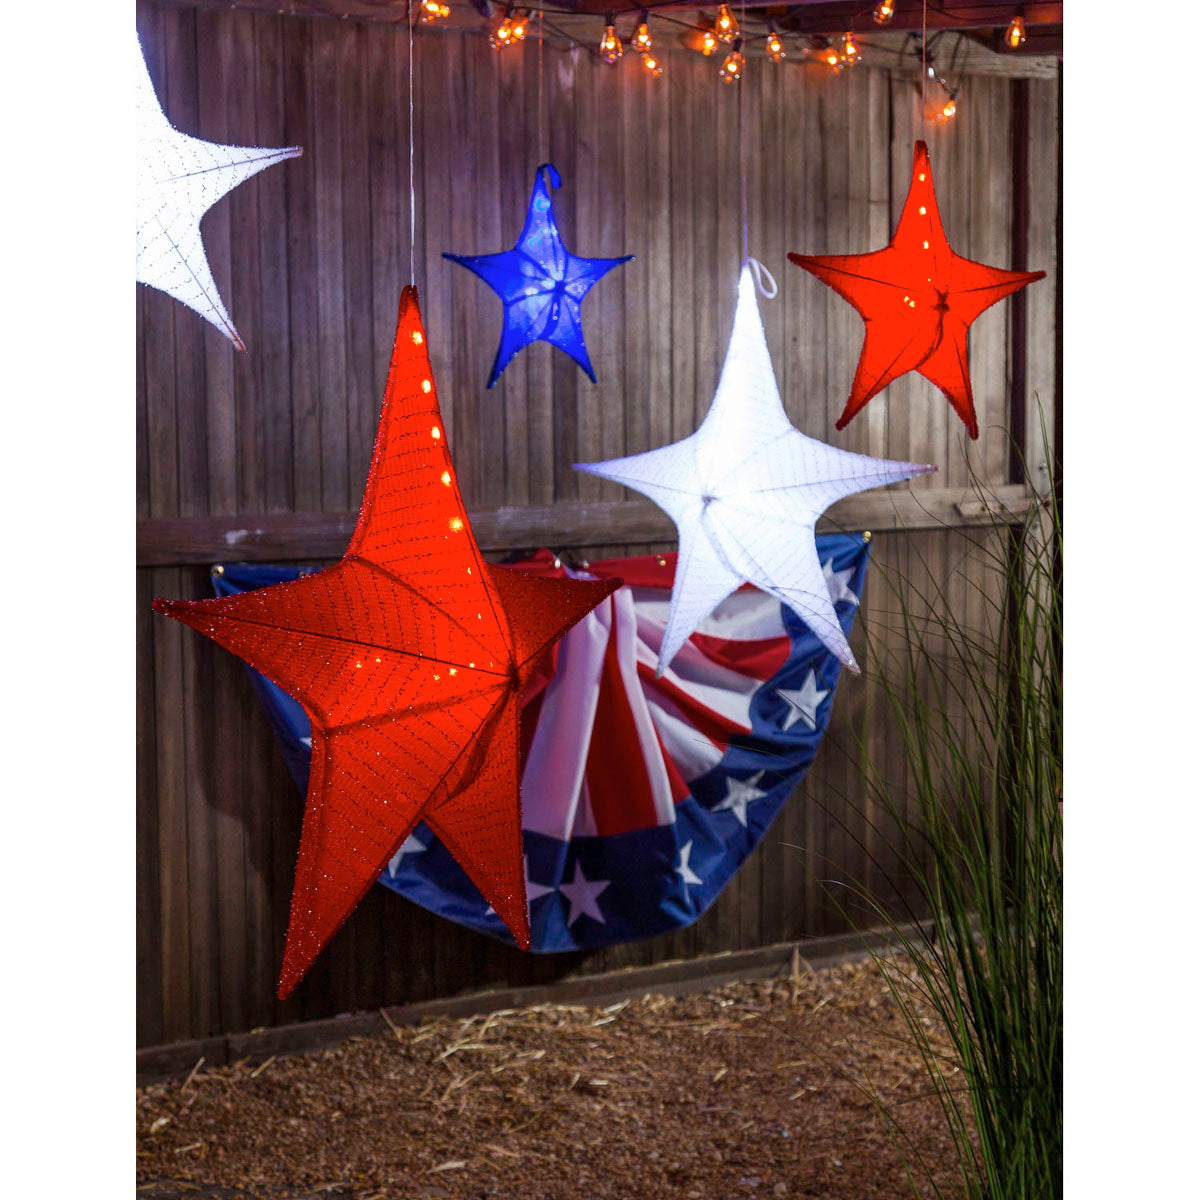 LED Lighted Fabric Star, White, Small